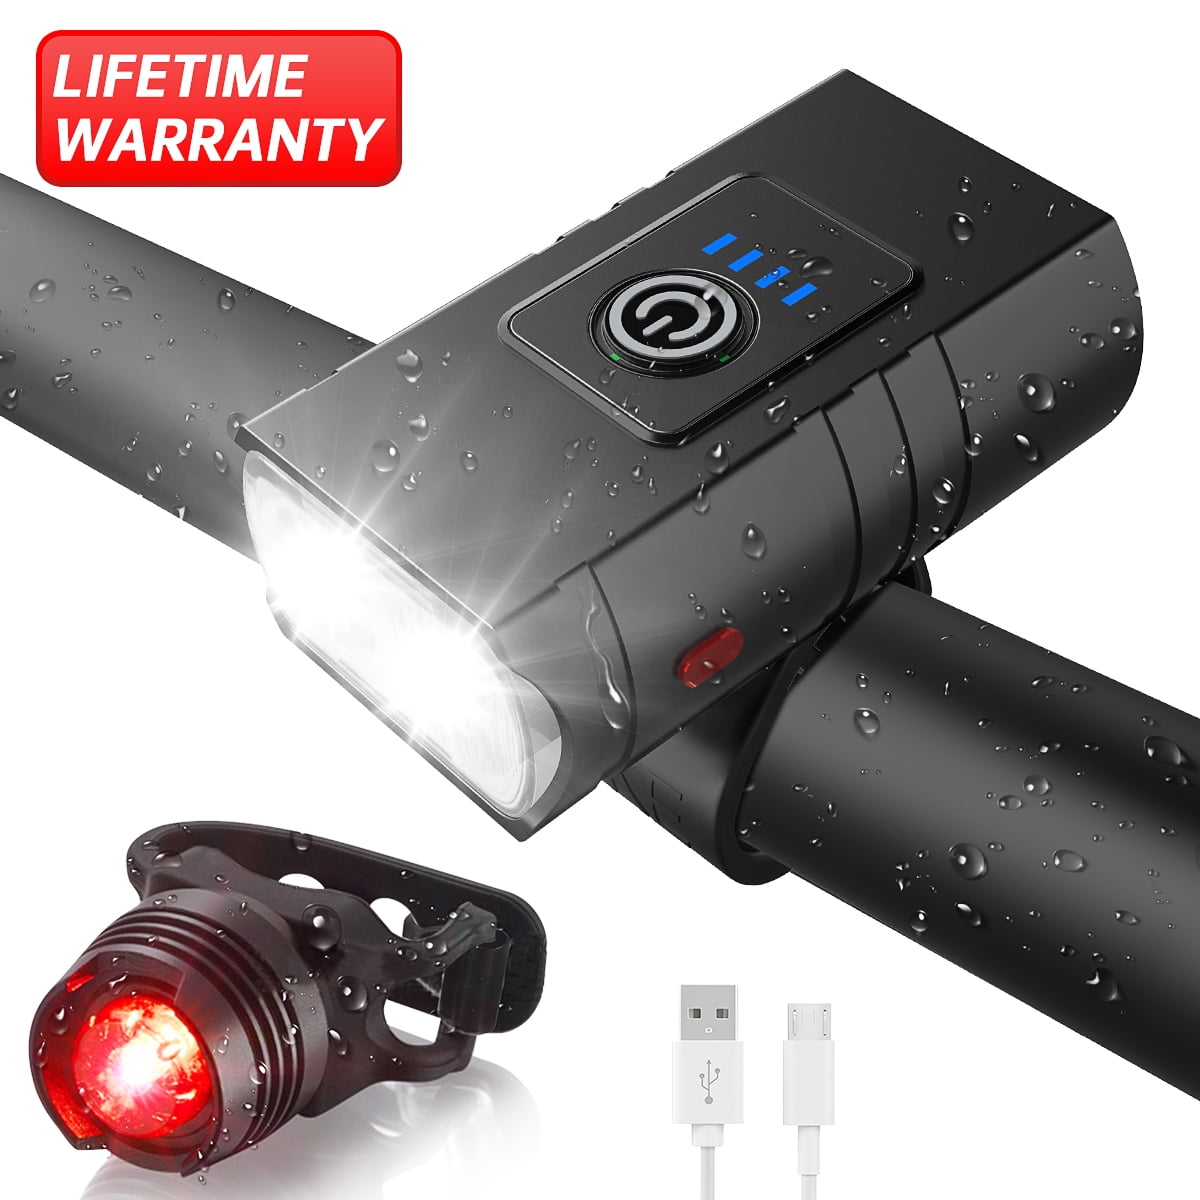 Waterproof Strong Light Bicycle Headlight Bike Lamp W/Taillight for Night Riding 